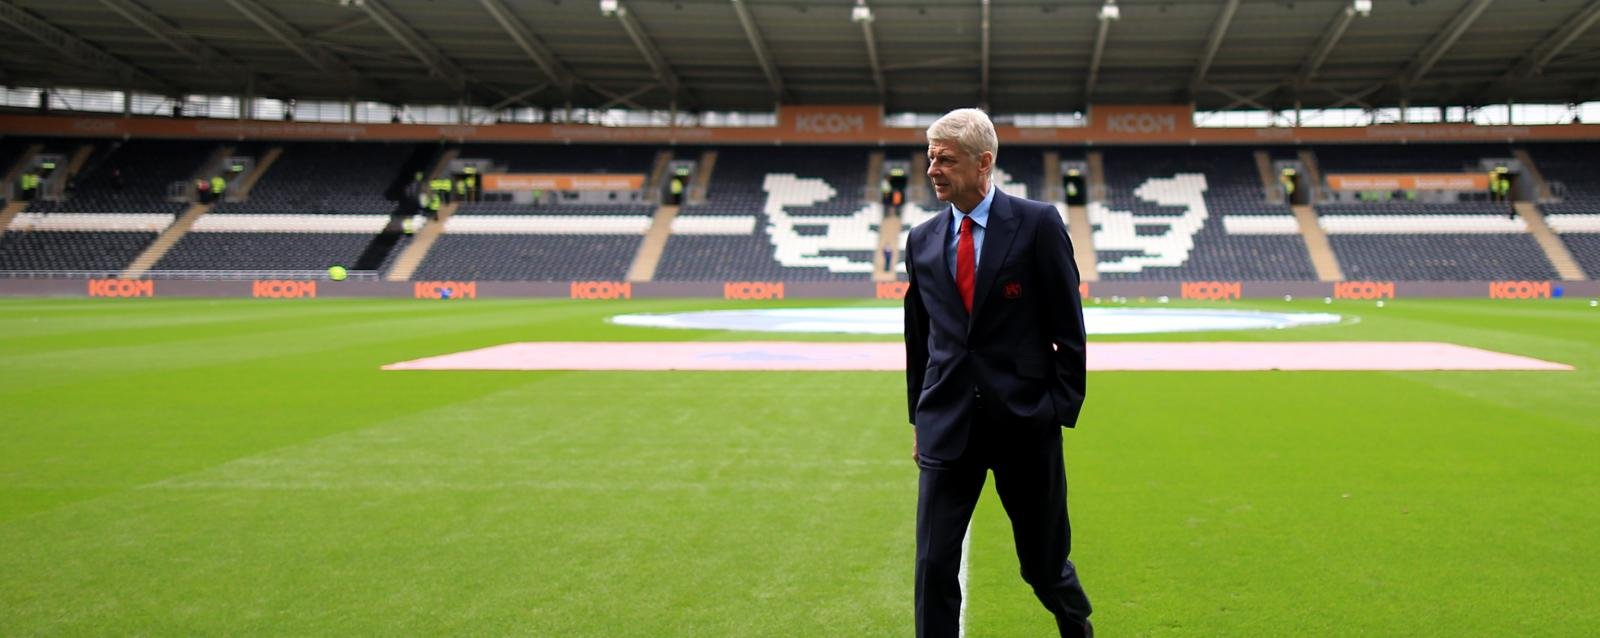 Fans react as Arsenal manager flirts with England job